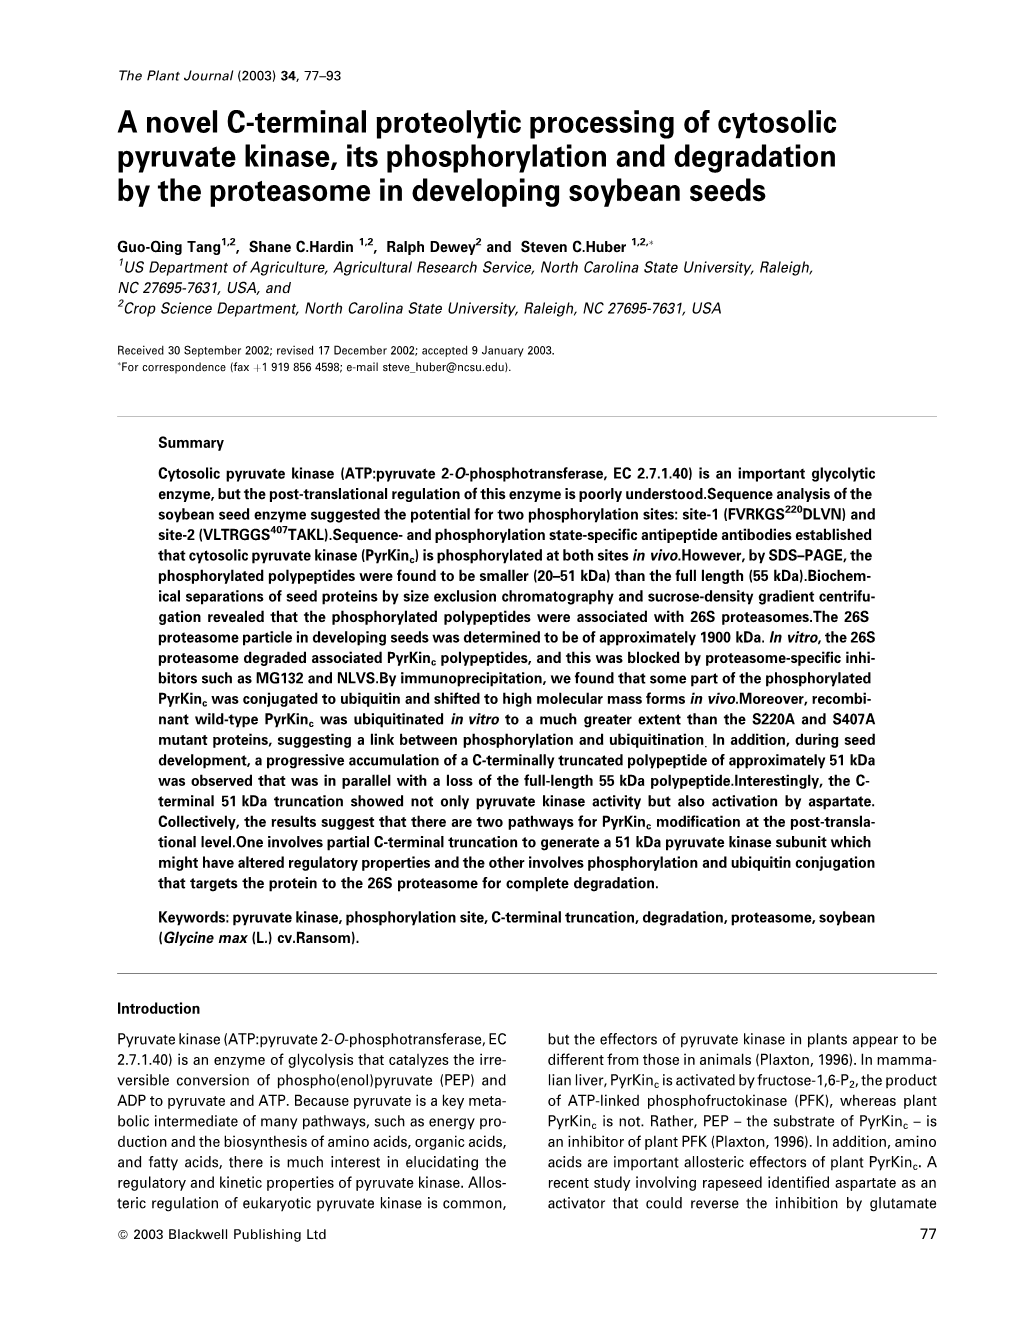 A Novel C-Terminal Proteolytic Processing of Cytosolic Pyruvate Kinase, Its Phosphorylation and Degradation by the Proteasome in Developing Soybean Seeds